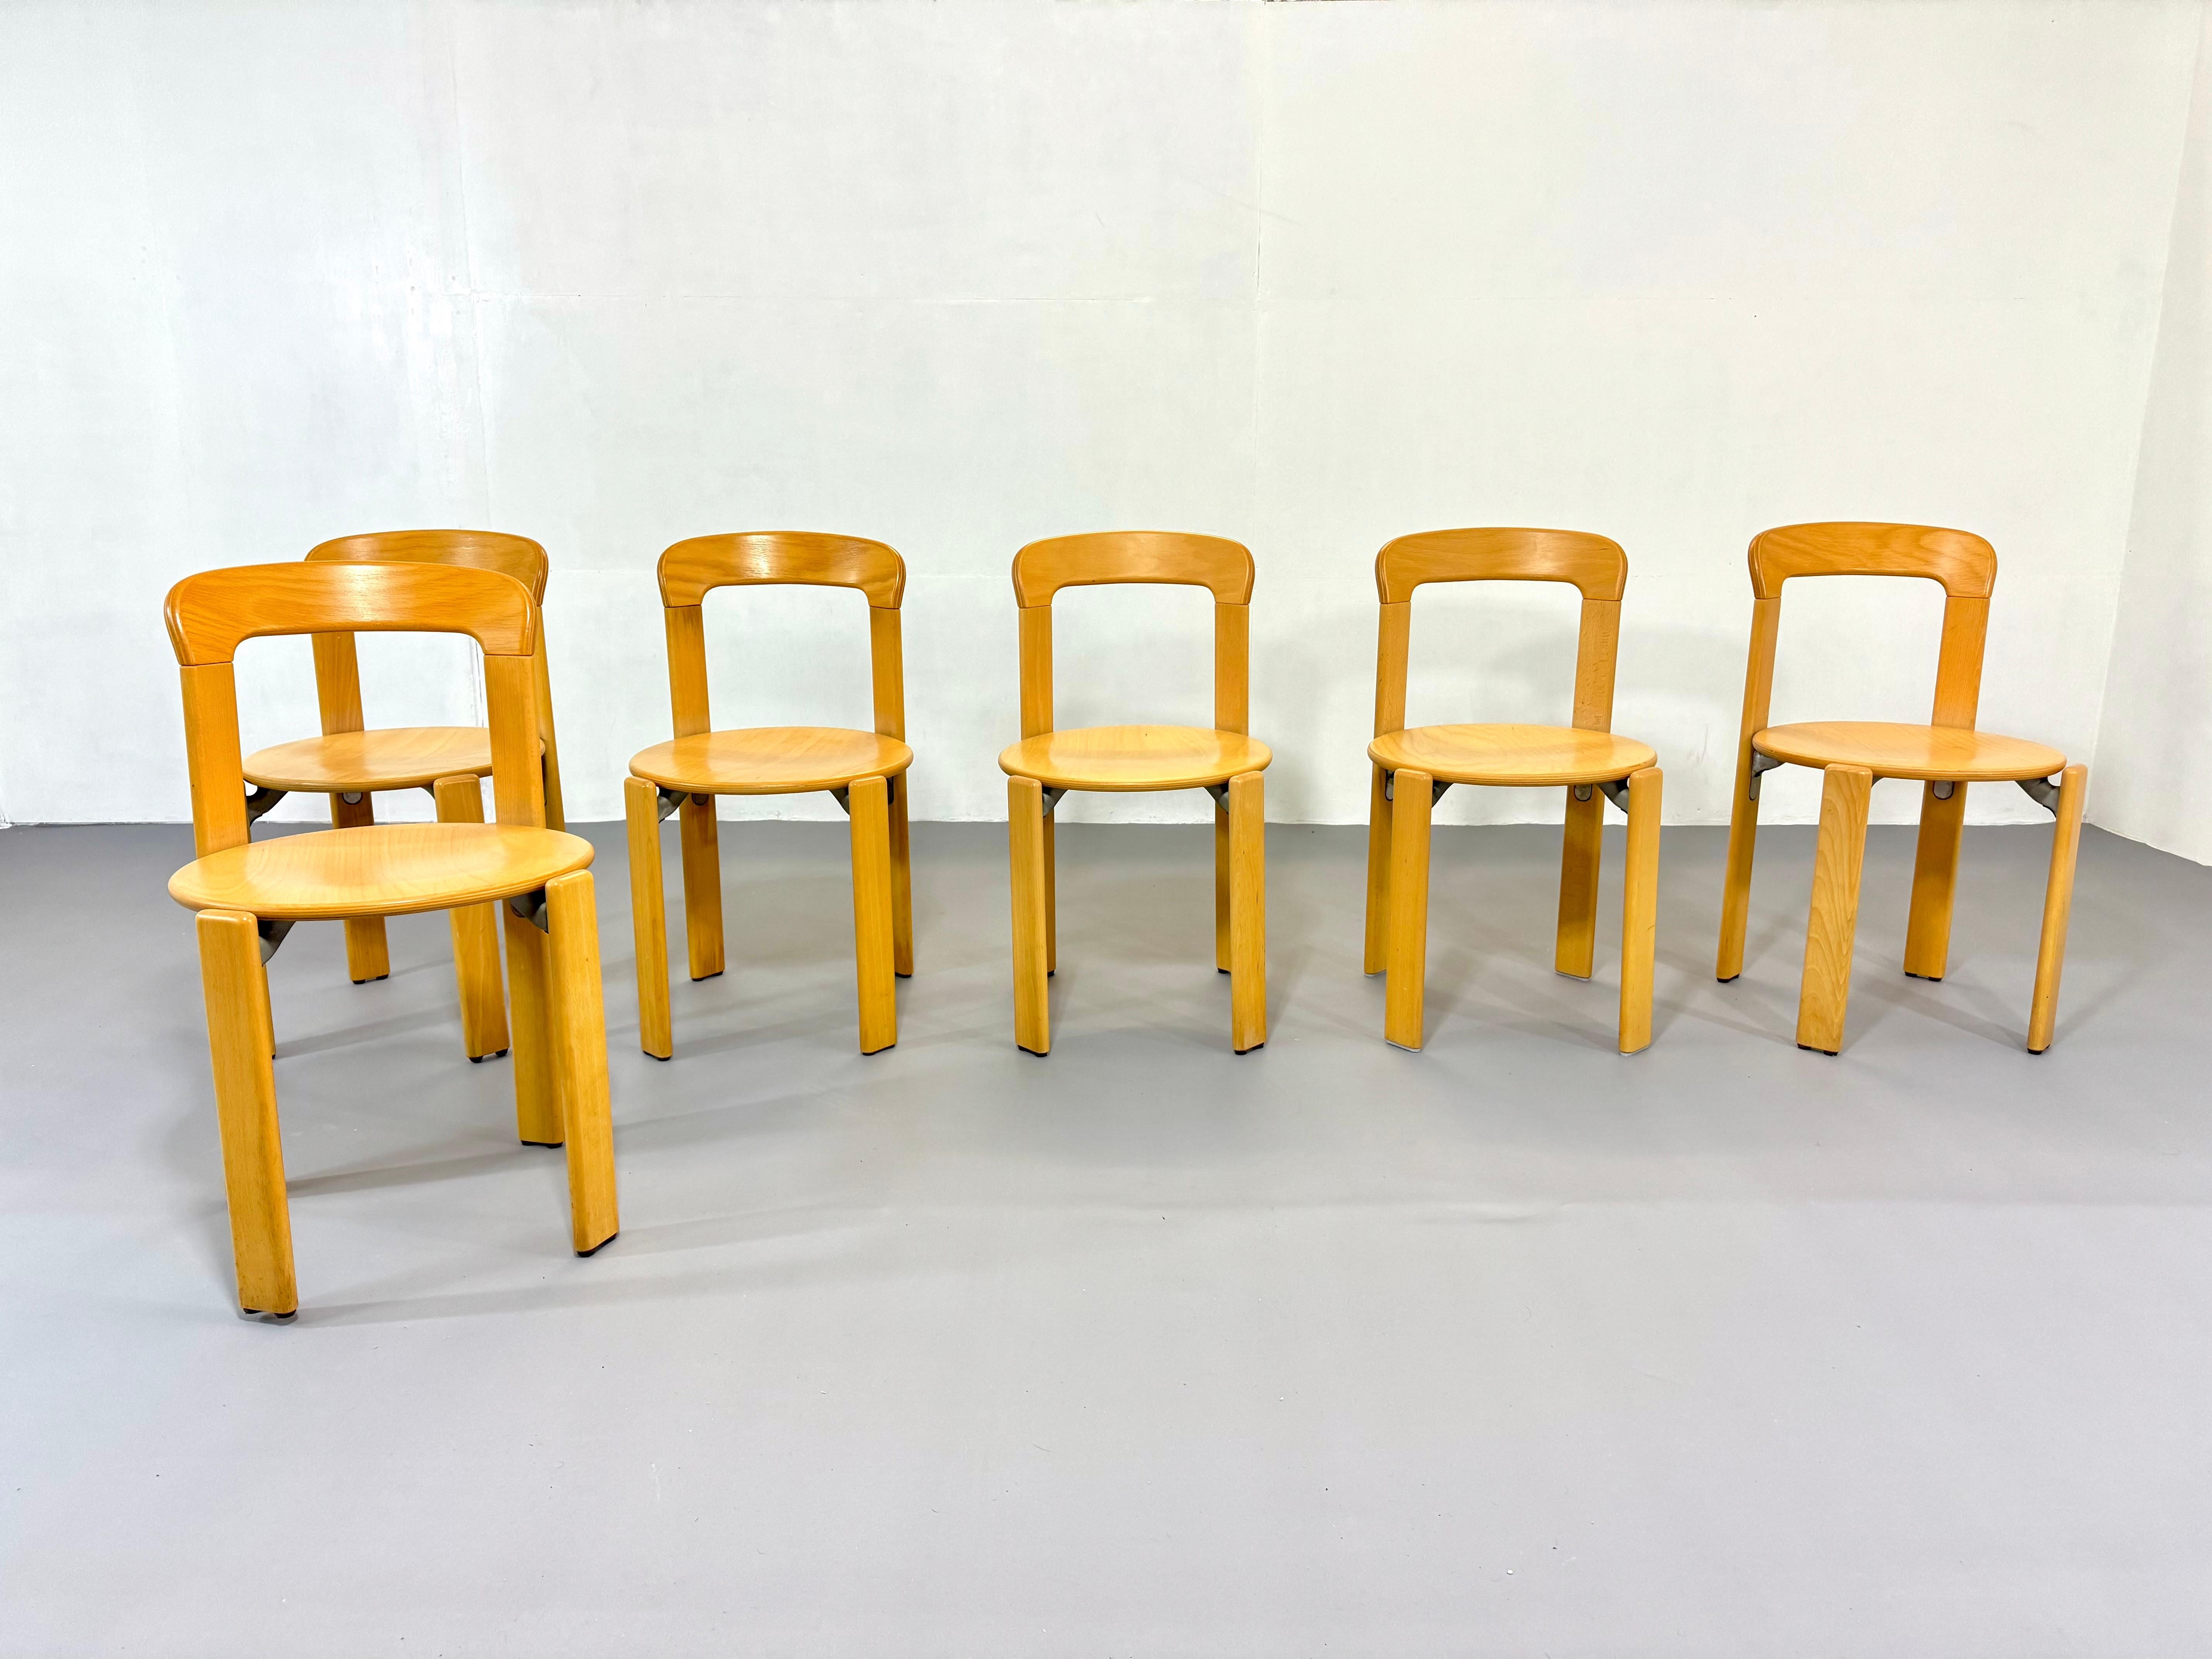 For aficionados of timeless design, we are offering an exclusive collection of 20 Bruno Rey chairs, available for purchase either individually or as a set. This opportunity is truly exceptional, as it is rare to find these iconic pieces in such